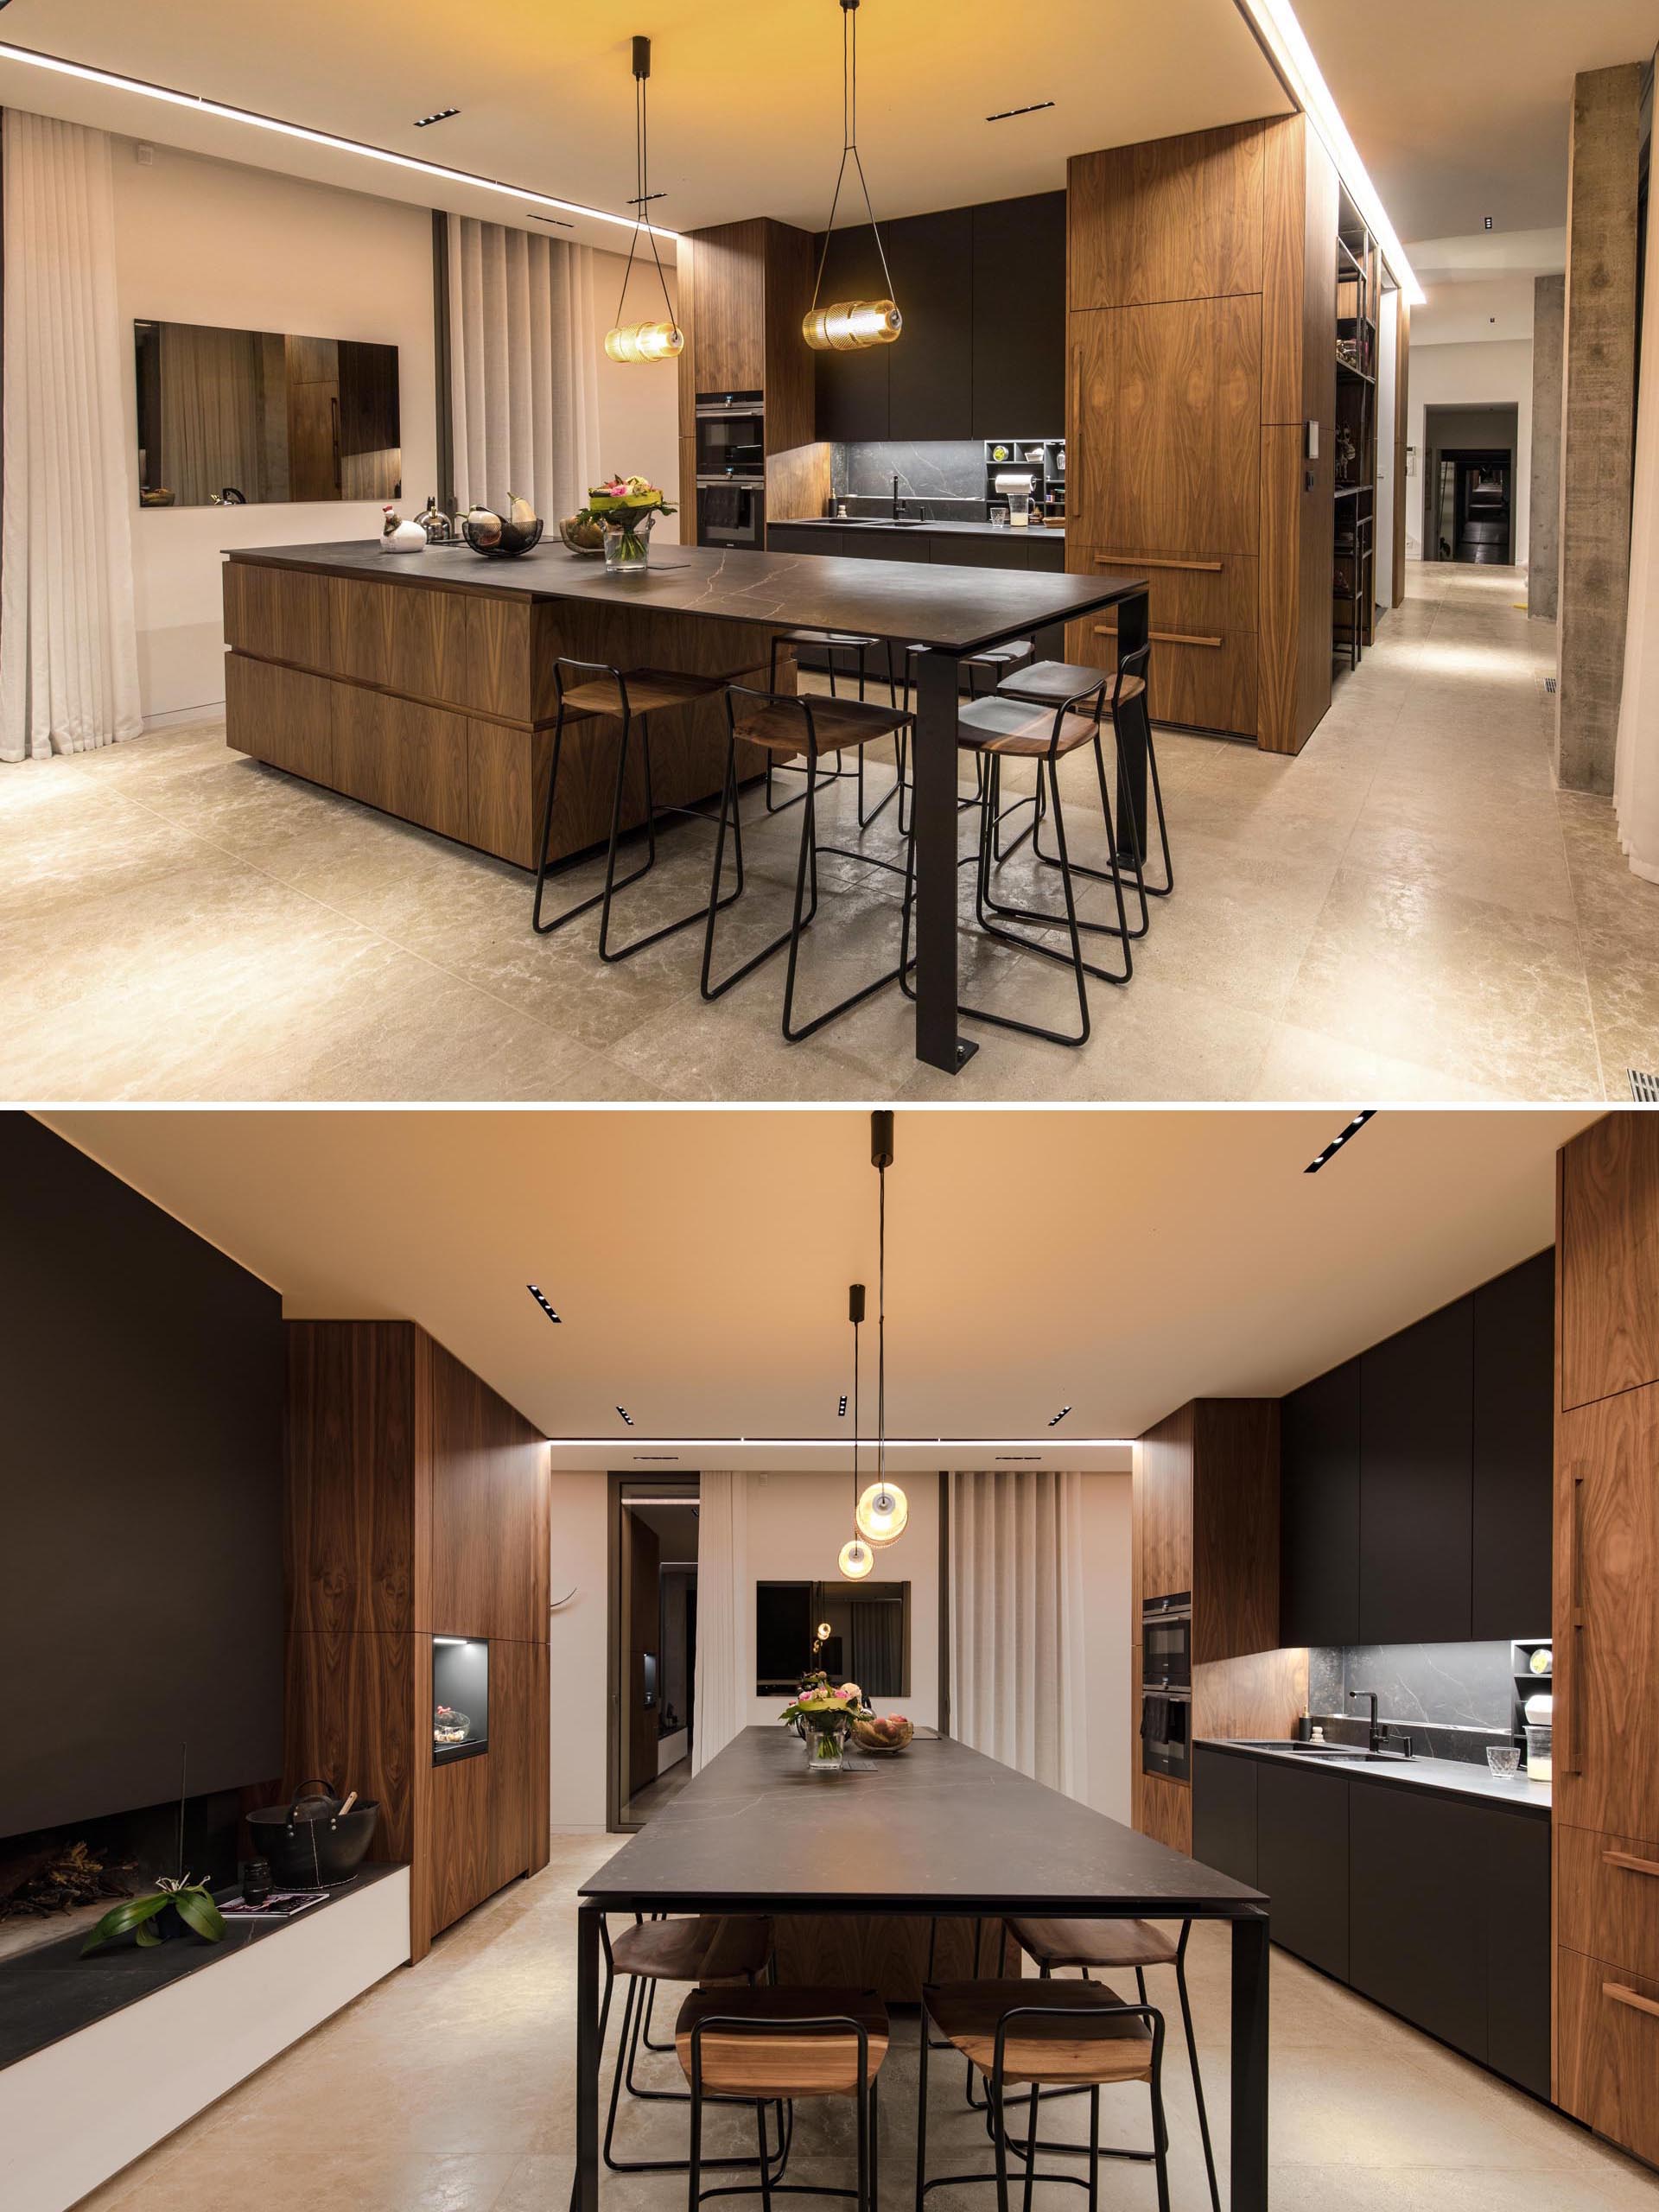 A black and wood kitchen with an island.